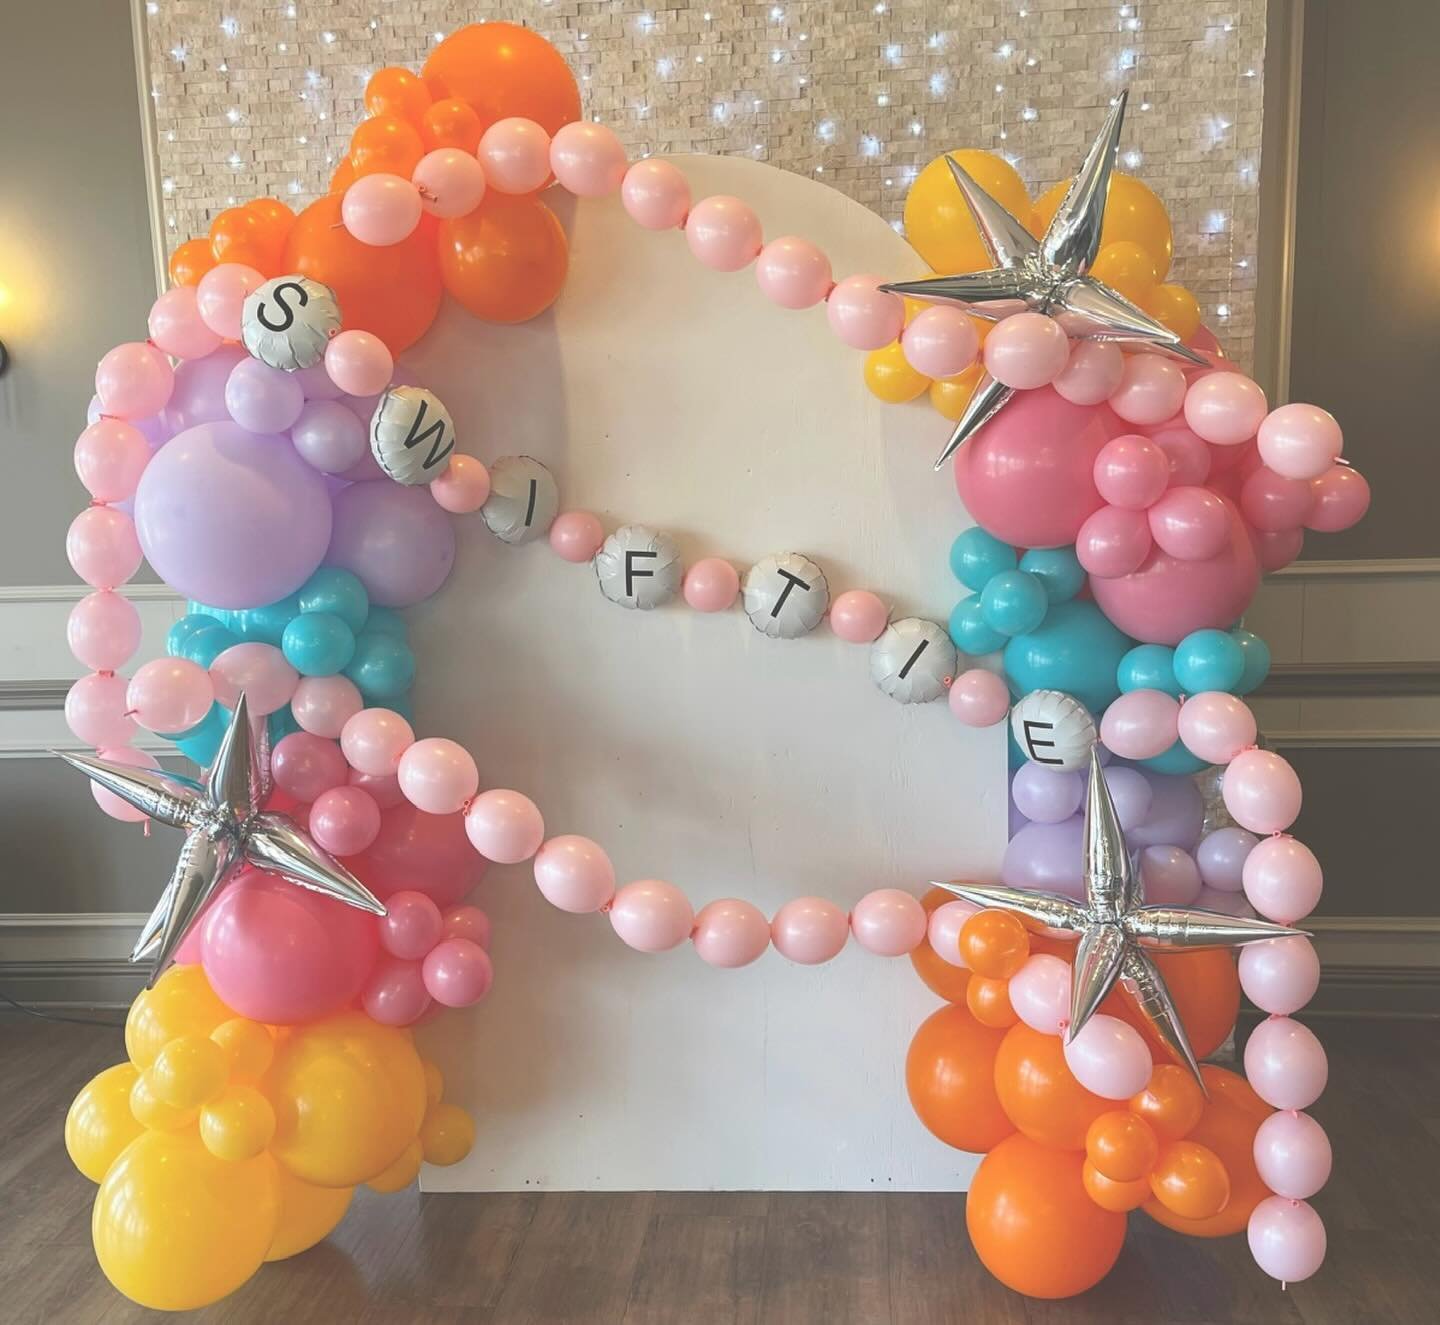 In our SWIFTIE era✨🪩
&bull;
Obsessed with this backdrop for @thelegendscc Taylor Swift night! The friendship bracelets are SO fun!! 🤩
#balloongarland #balloons #stlballoons #stlparty #stlbusinessowner #smallbusiness #womenownedbusiness #swiftie #ta